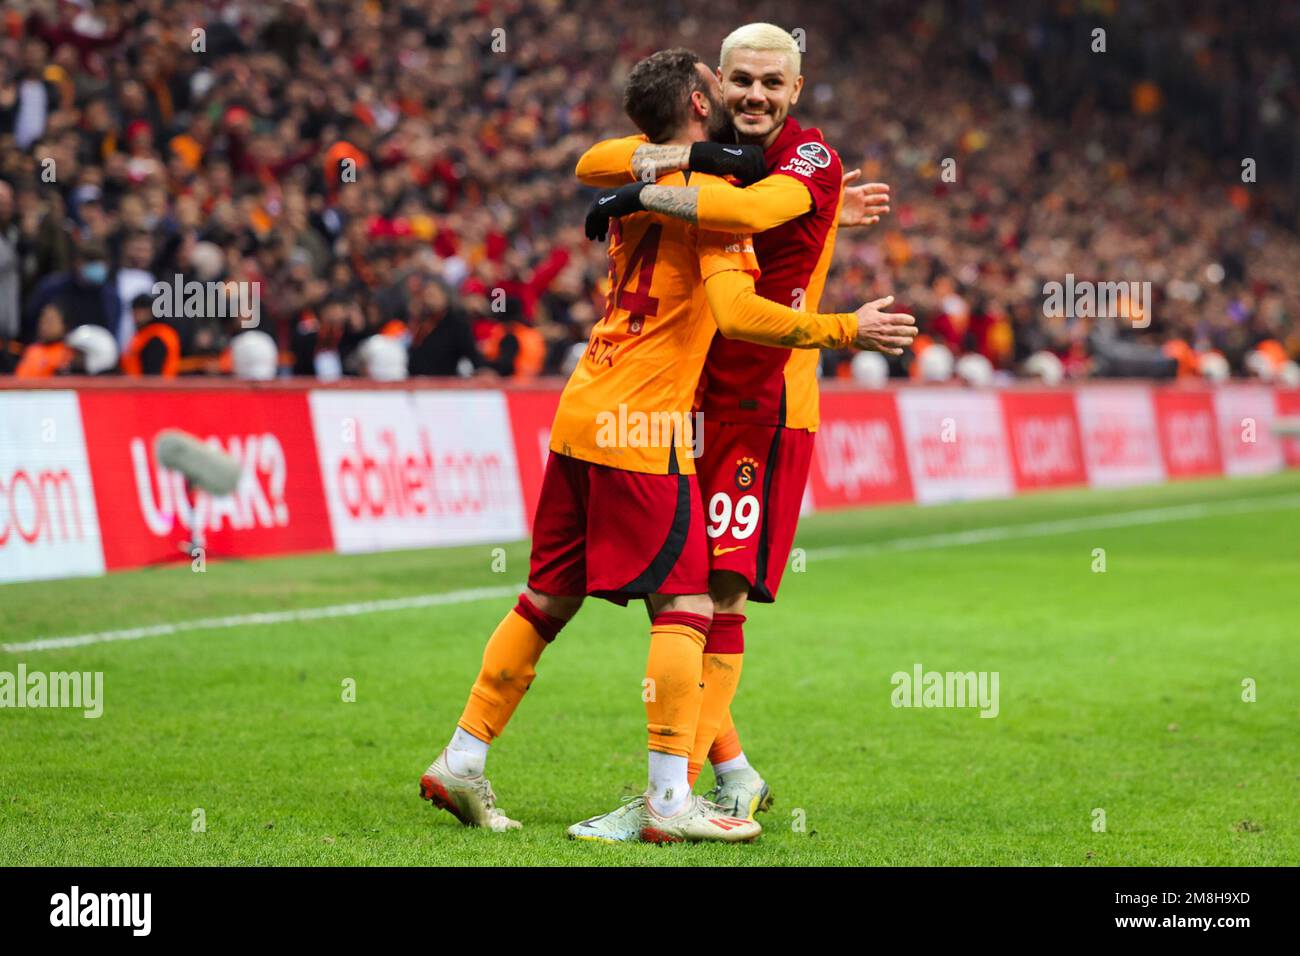 ISTANBUL, TURKEY - JANUARY 13: Juan Mata of Galatasaray celebrates after  scoring the team's second goal with Mauro Icardi of Galatasaray during the  Super Lig match between Galatasaray and Hatayspor at the